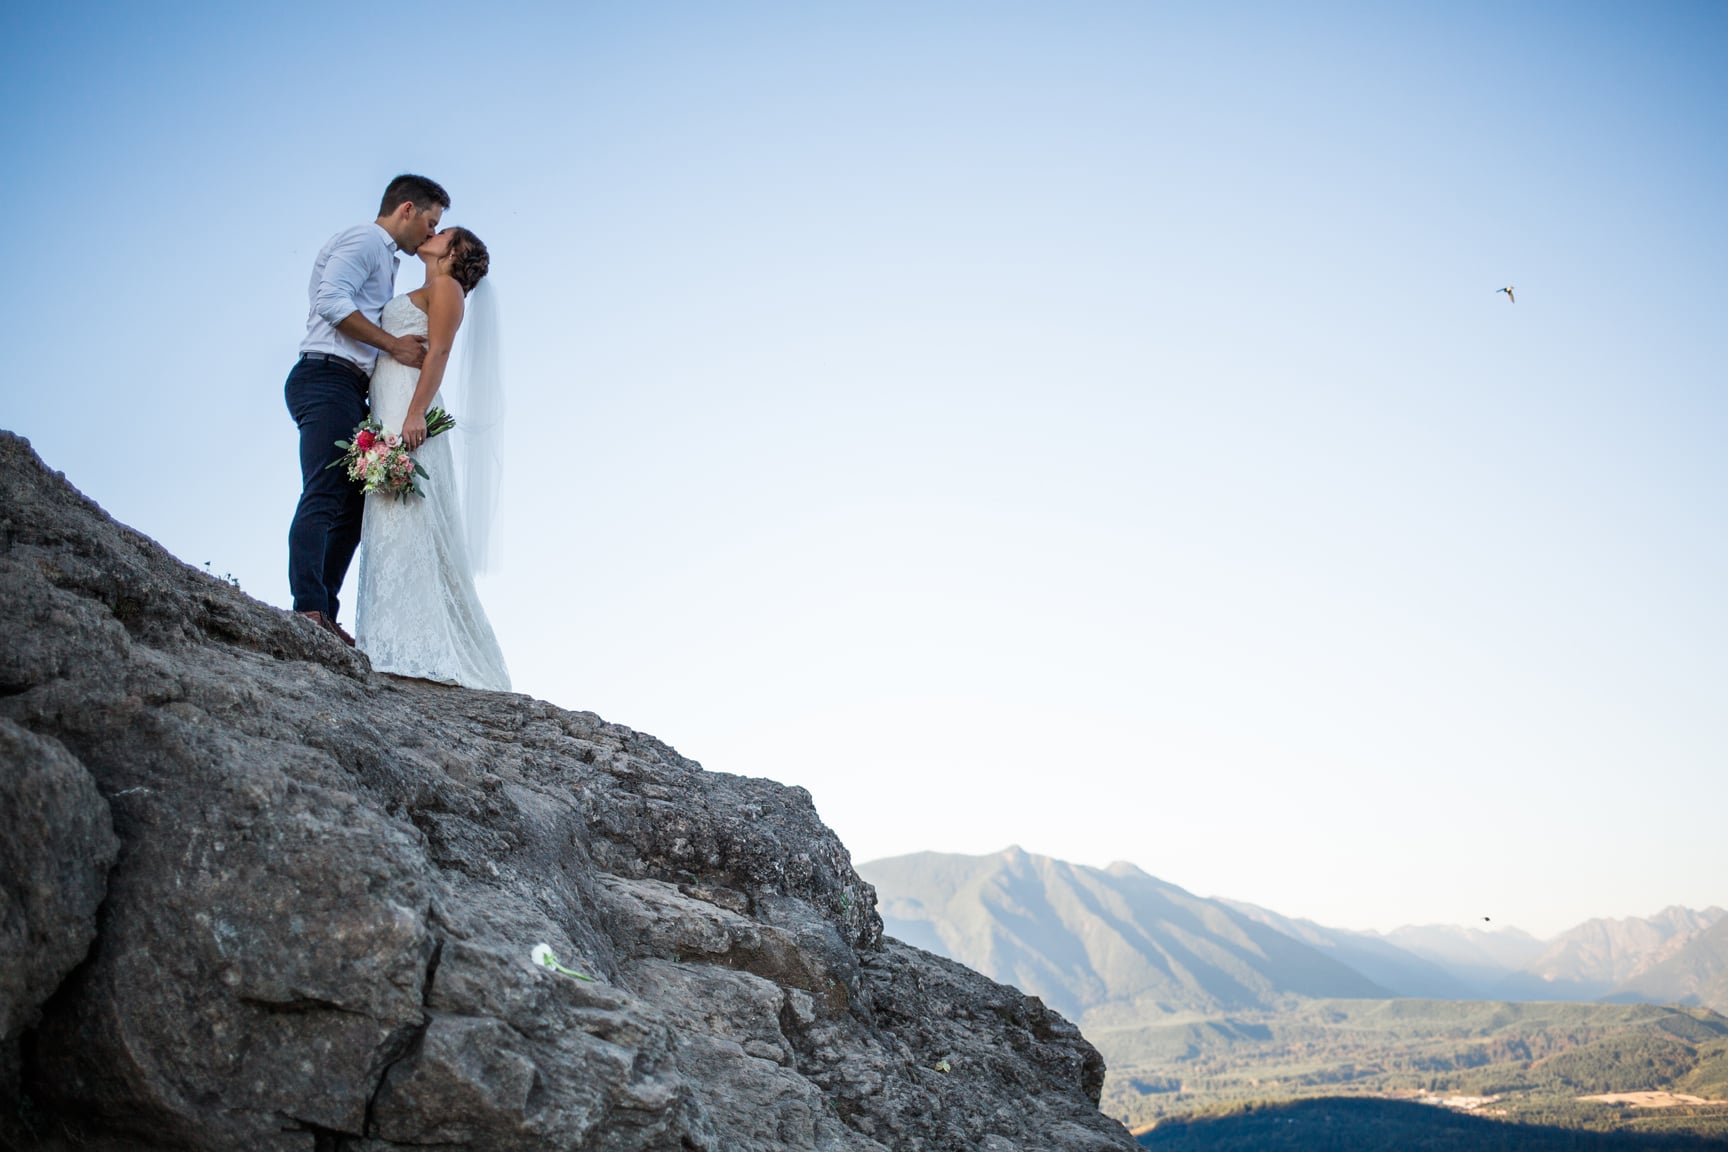 Bride and groom at Rattlesnake Ledge by Alexandra Knight Photography.